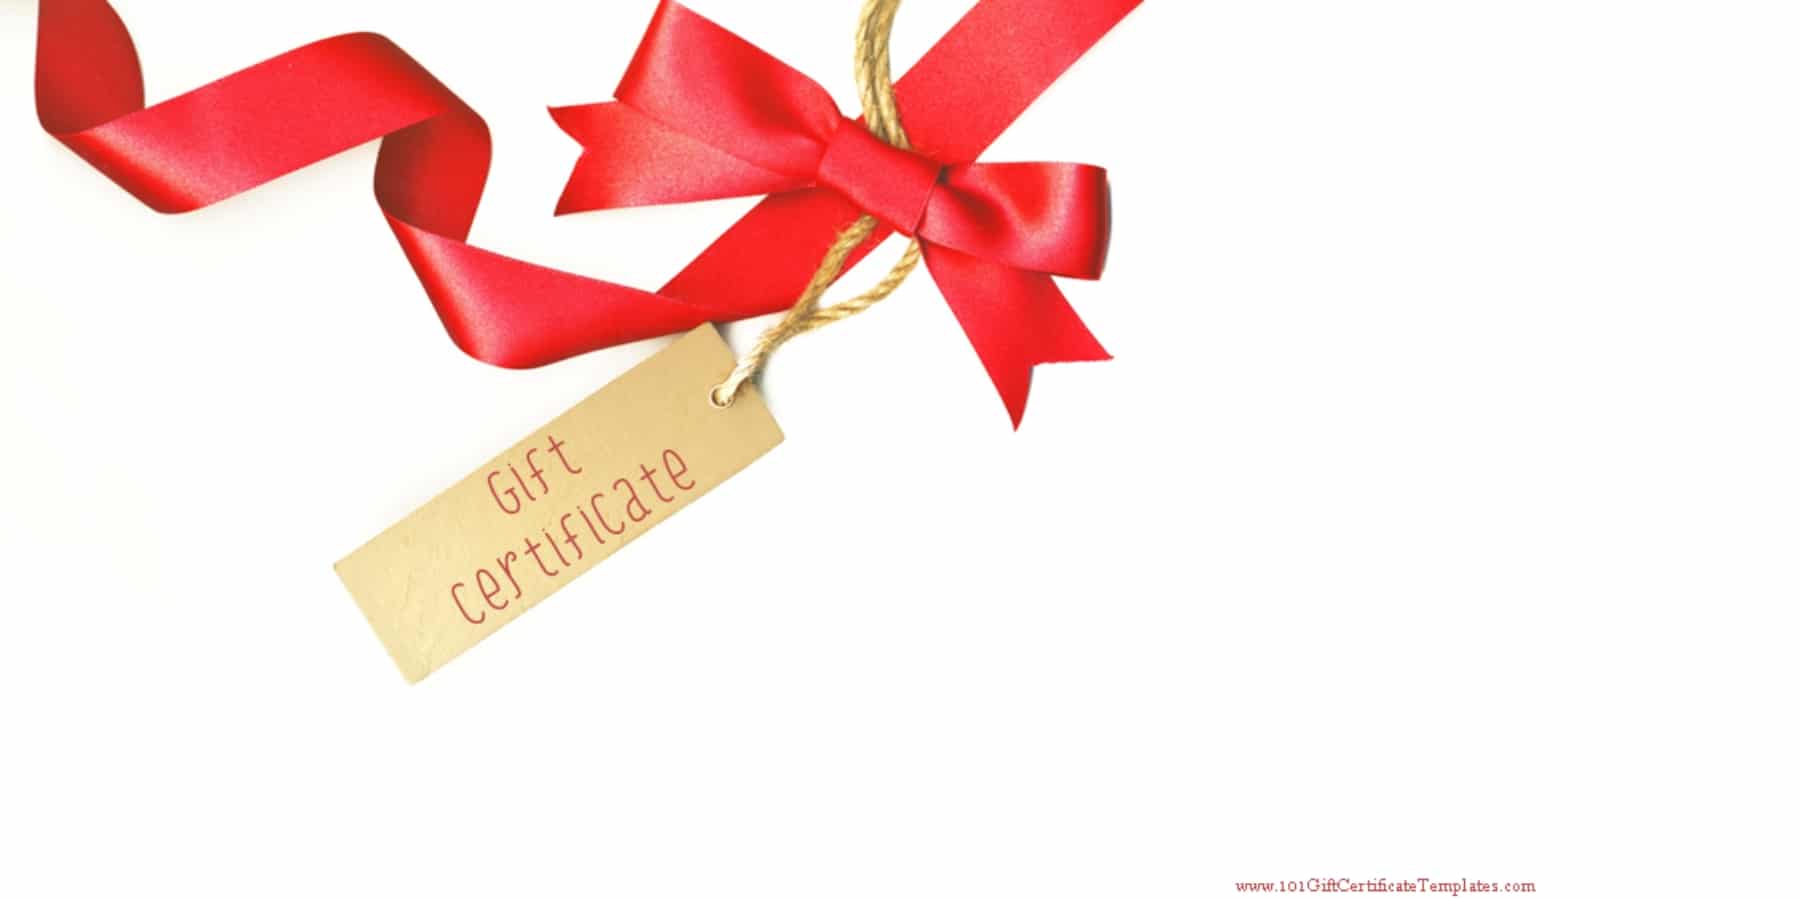 printable-gift-certificate-template-free-collection